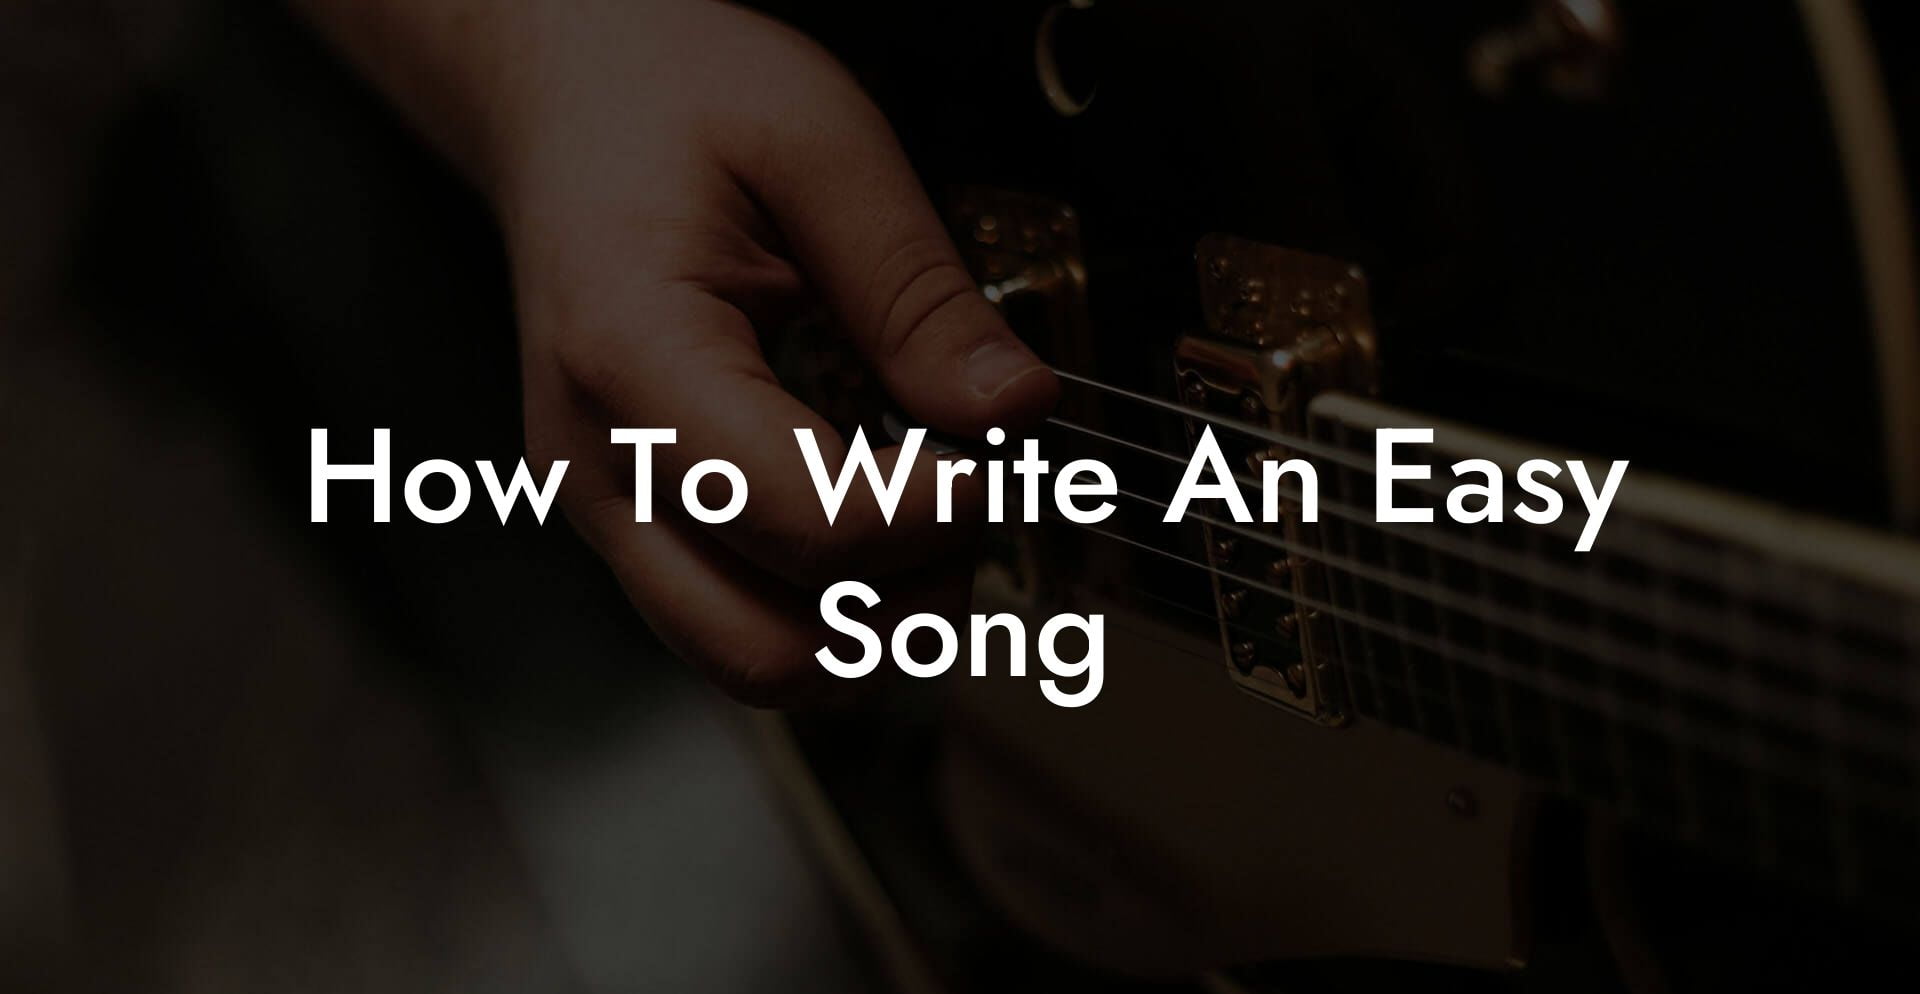 how to write an easy song lyric assistant